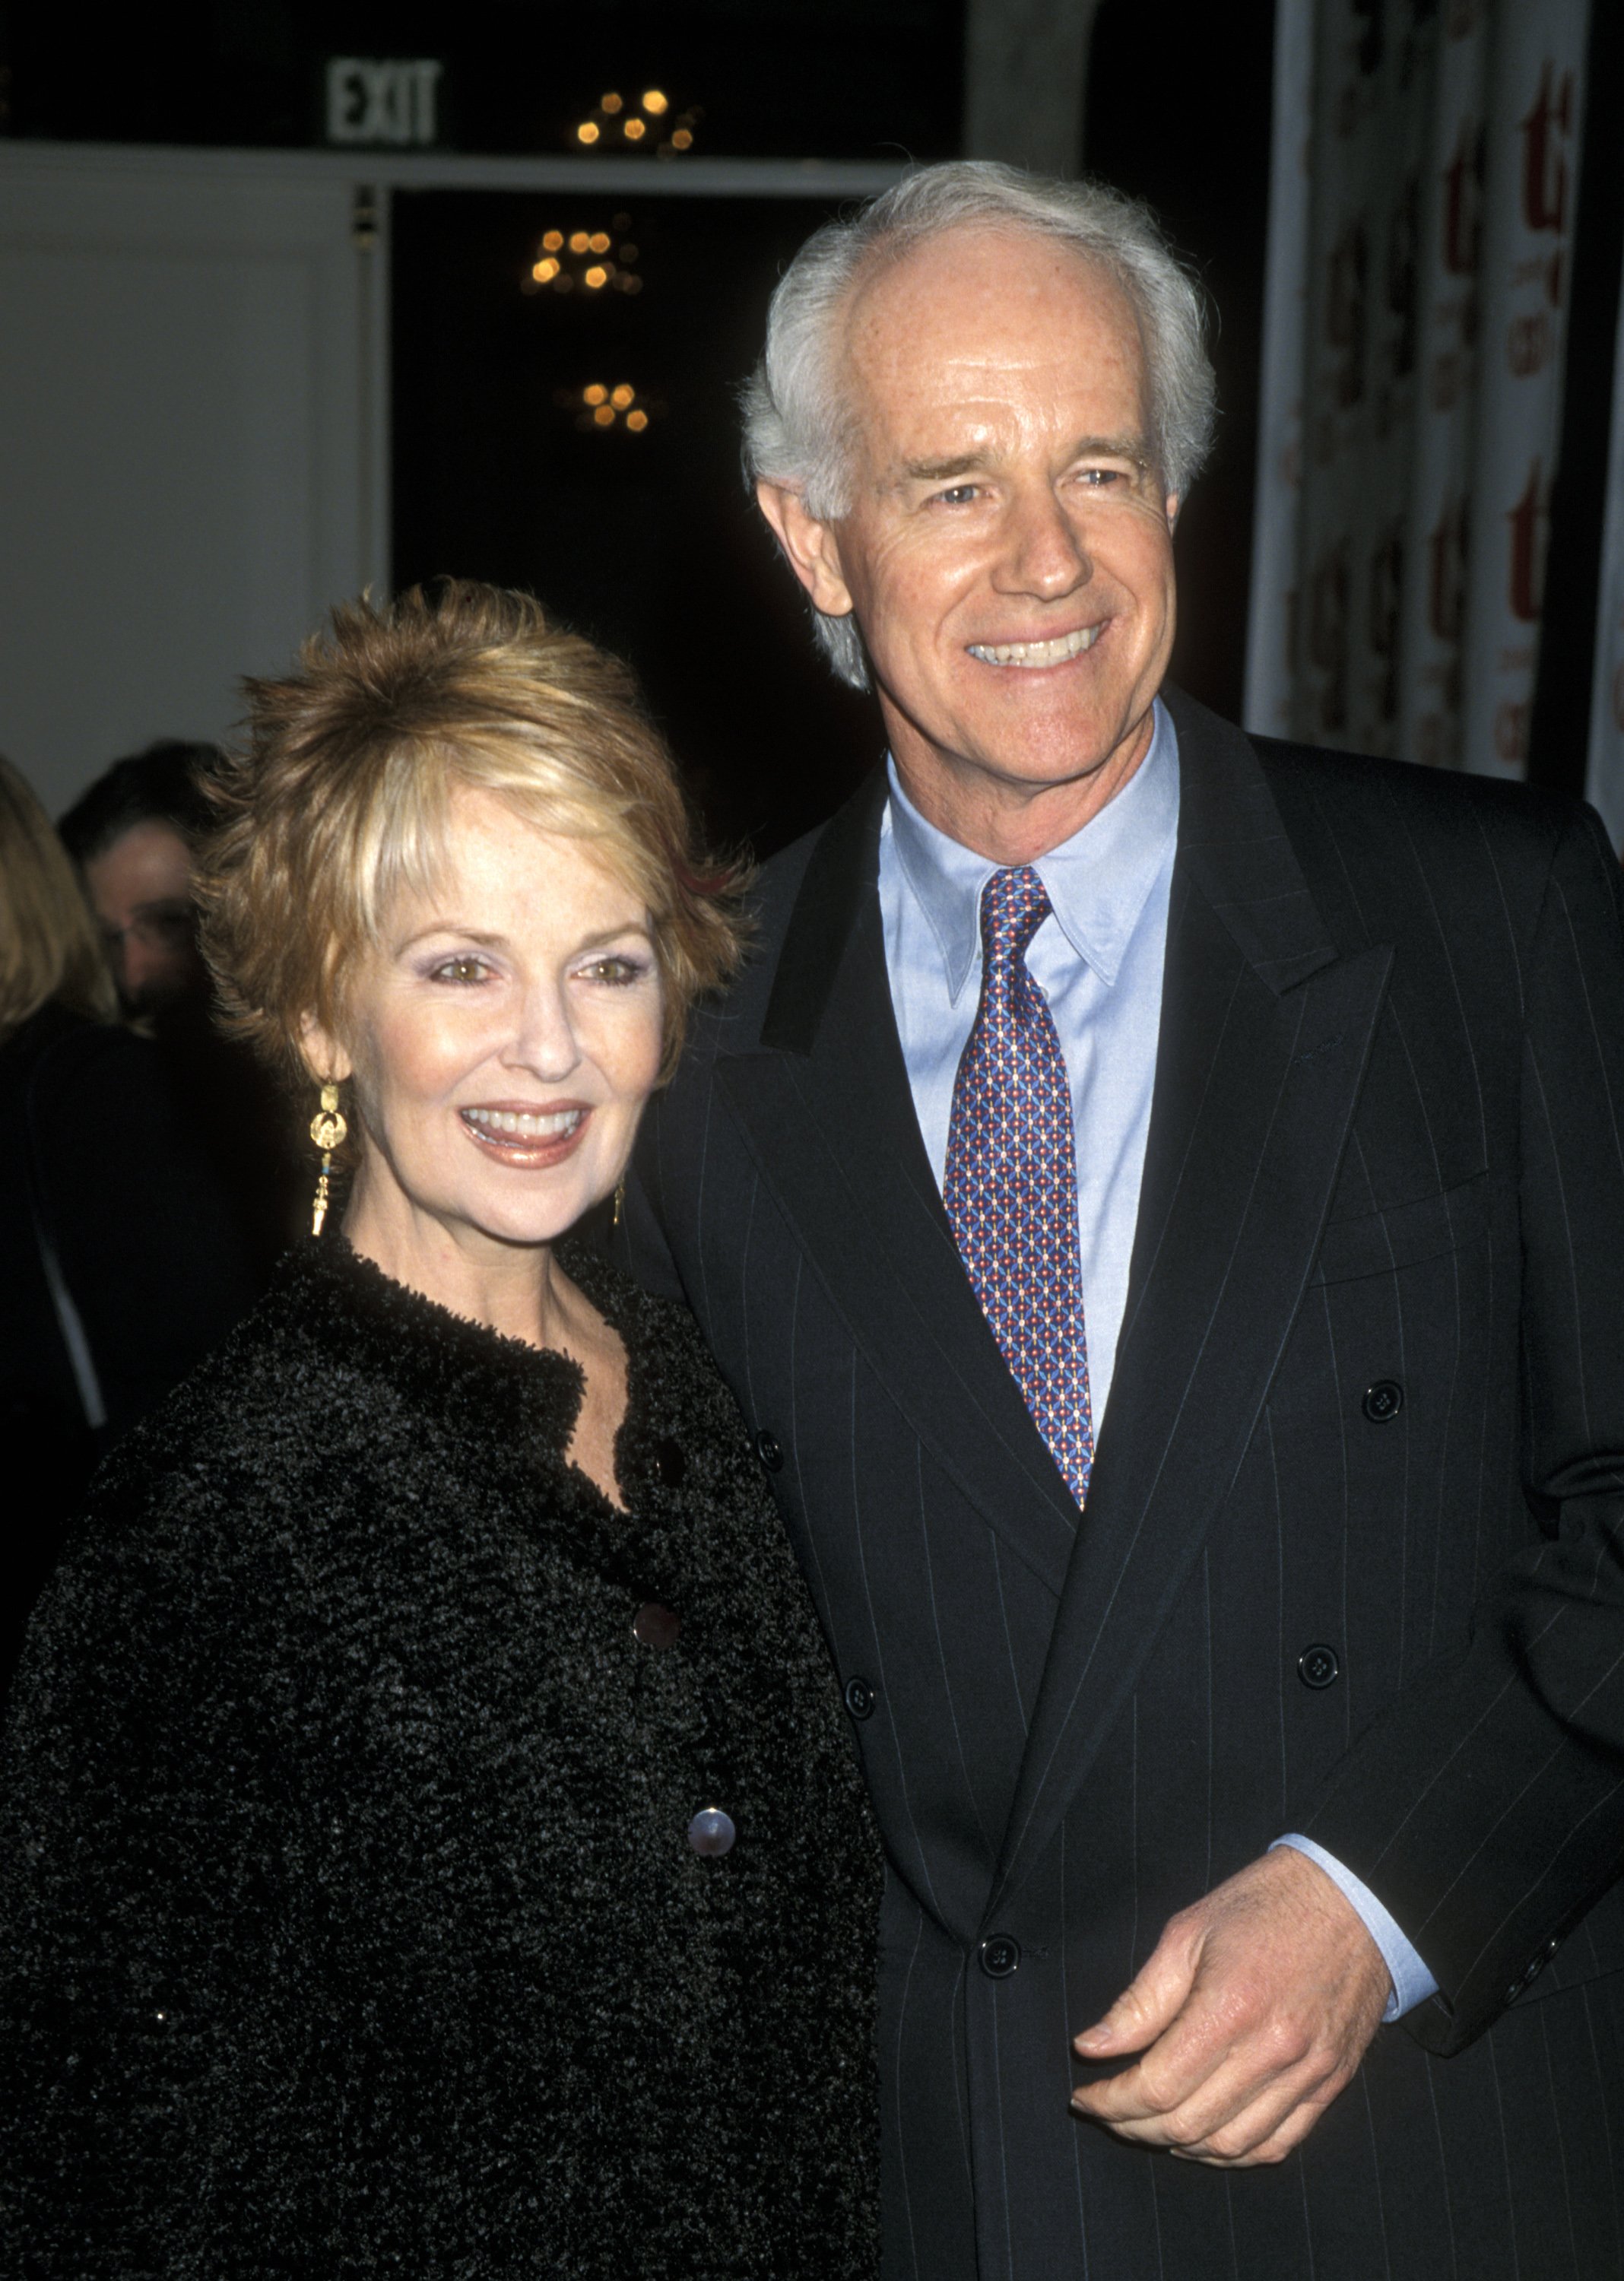 Shelley Fabares and Mike Farrell at the "2000 Tourette Syndrome Awards Dinner" on February 10, 2000 | Source: Getty Images